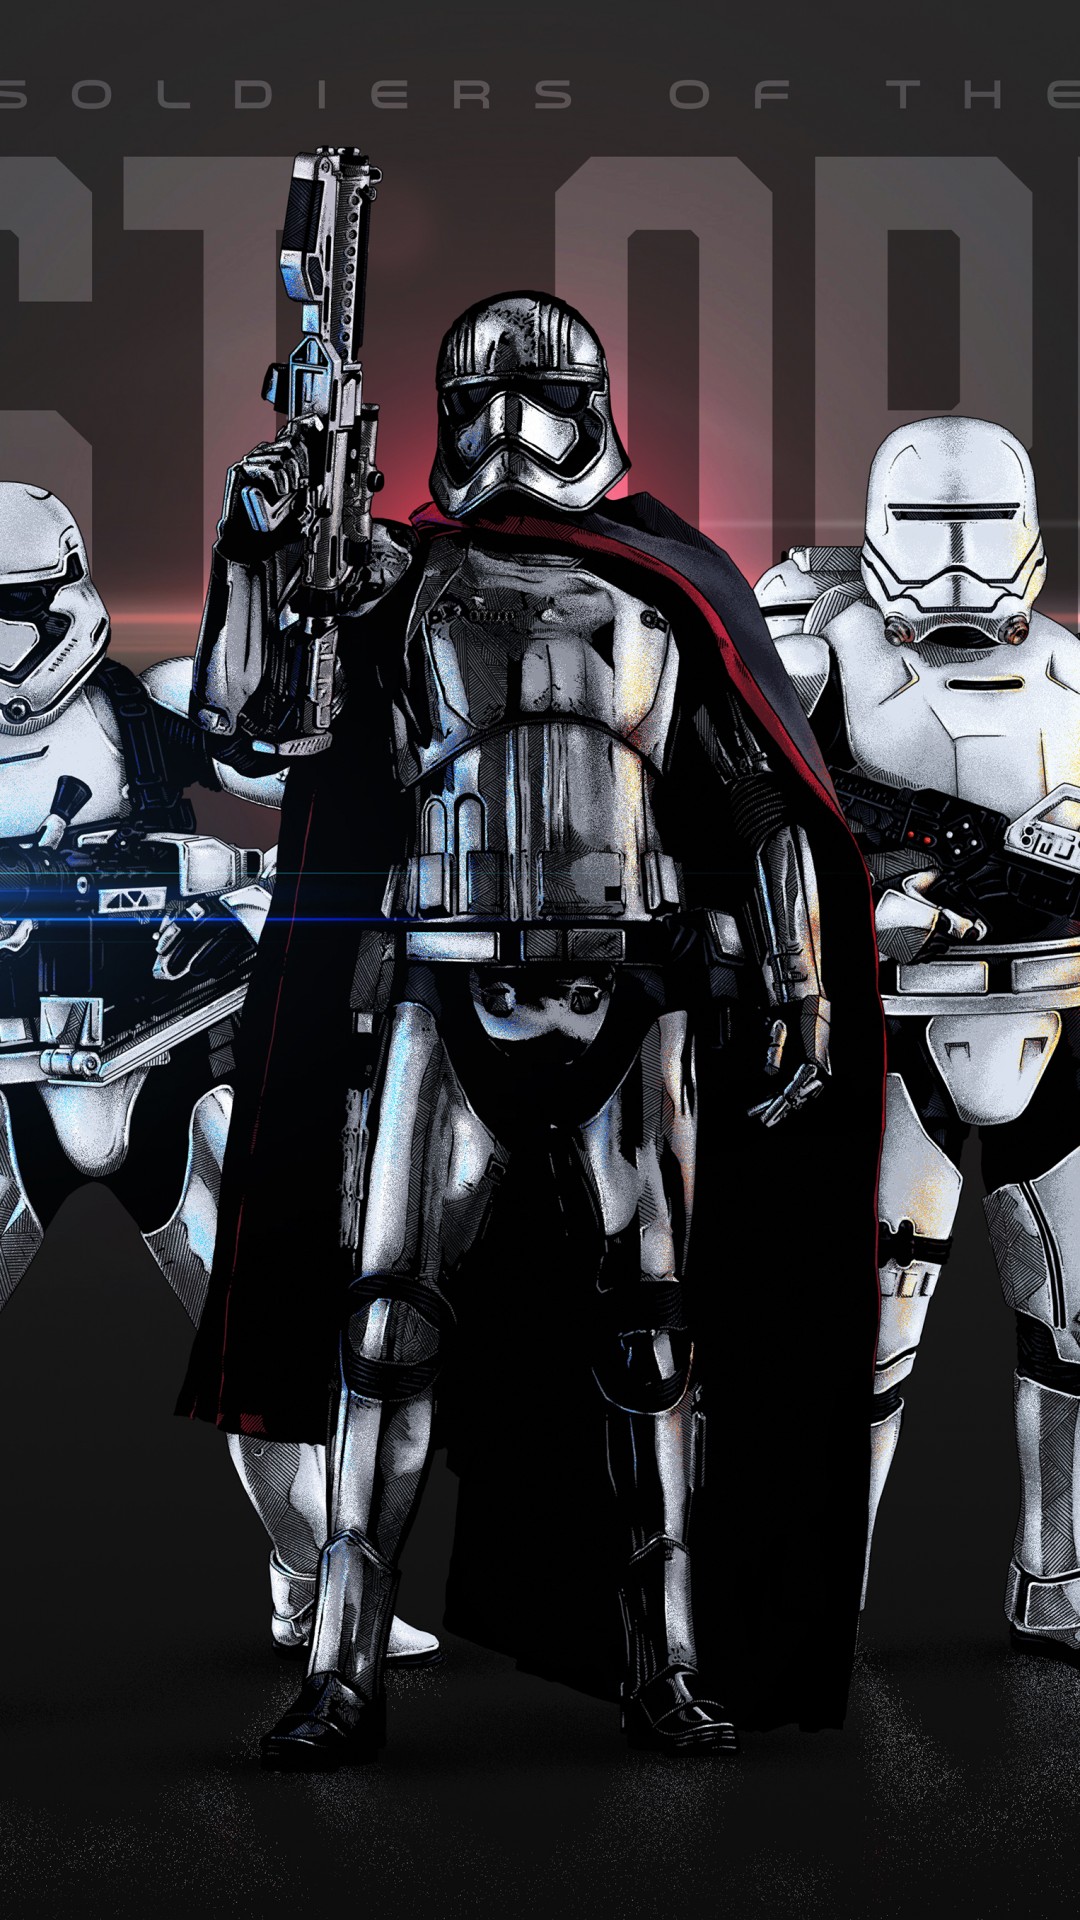 Captain Phasma And Stormtroopers - HD Wallpaper 